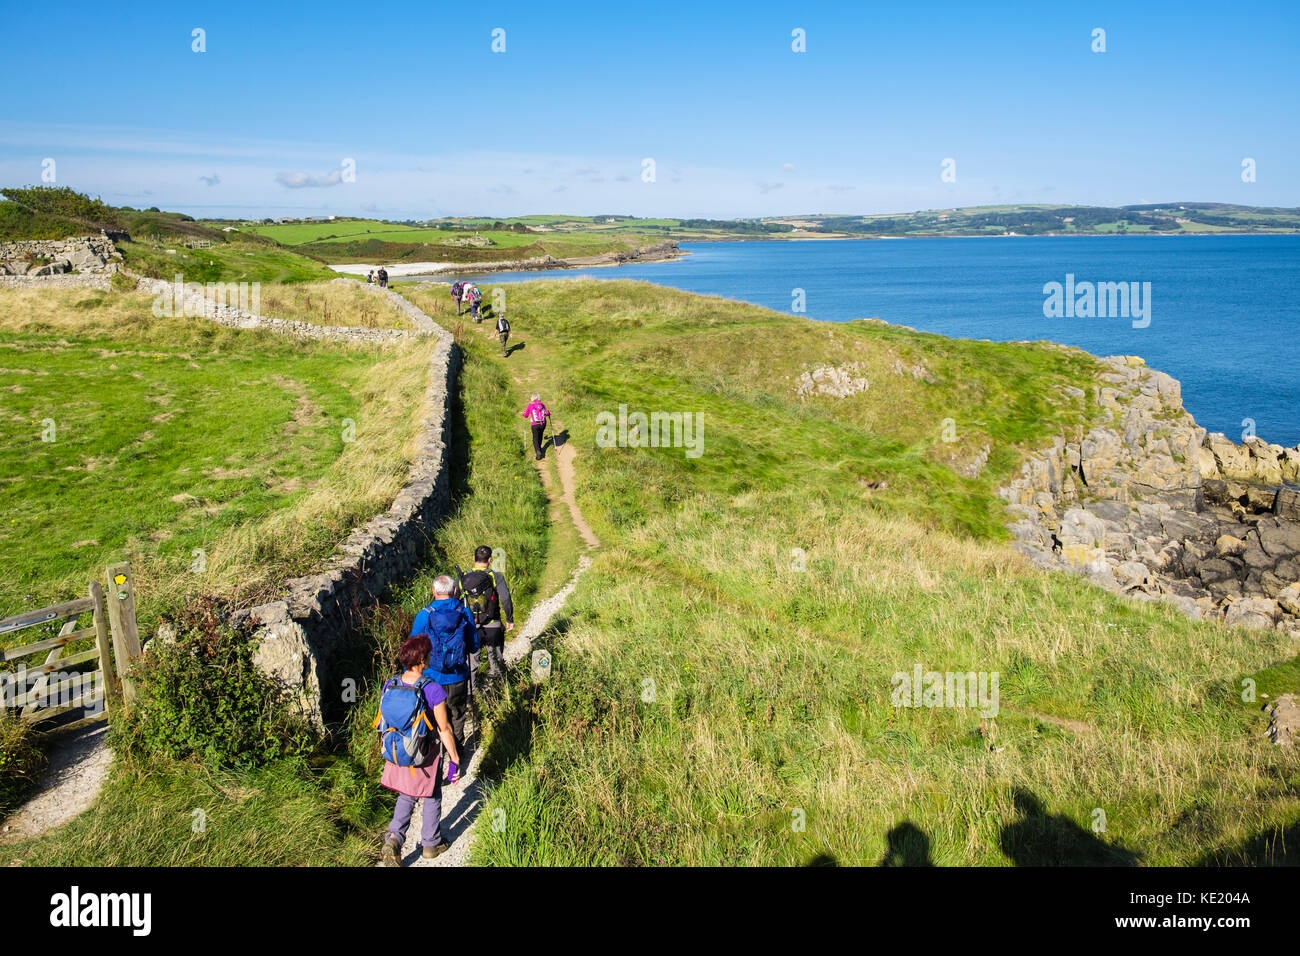 Ramblers on Anglesey Coastal Path walking towards Lligwy Bay from Moelfre, Isle of Anglesey, North Wales, UK, Britain Stock Photo